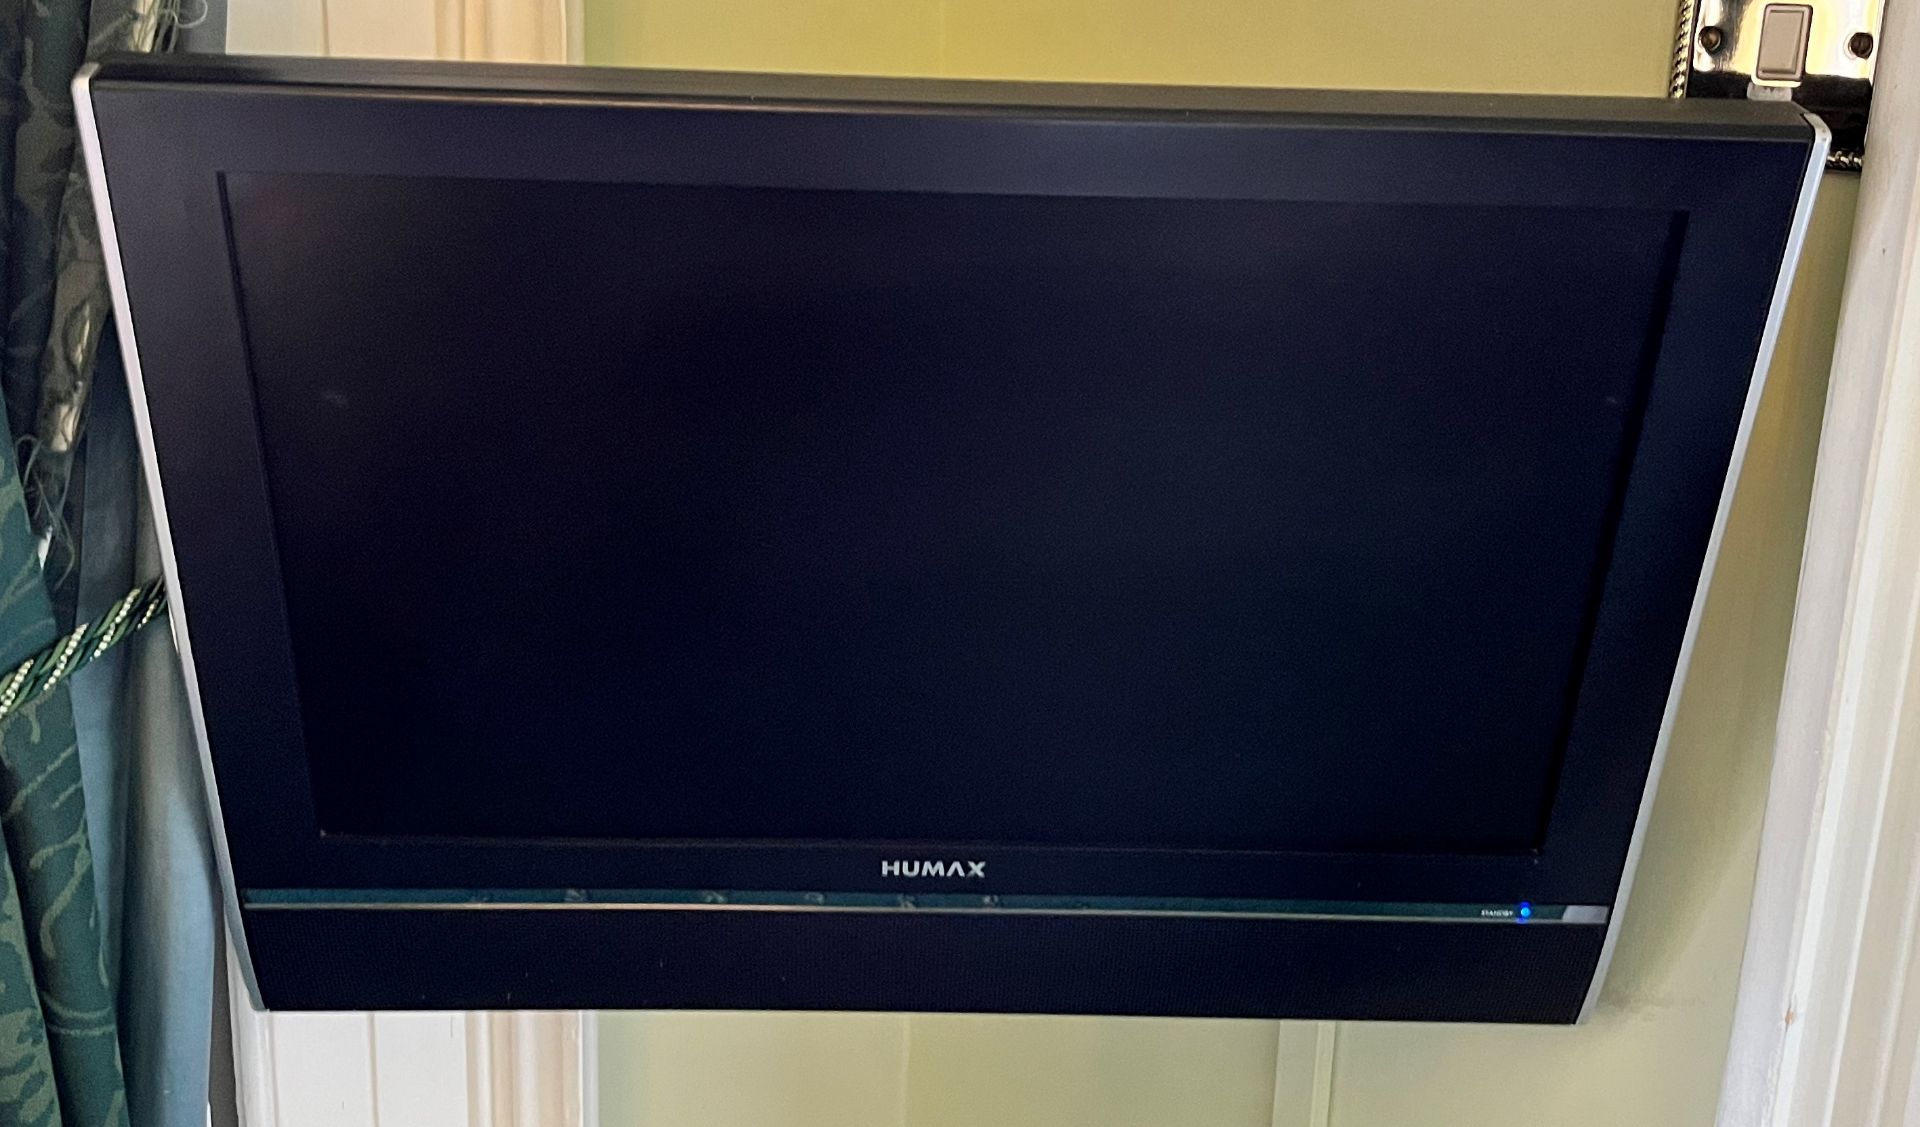 HUMAX TELEVISION AND REMOTE